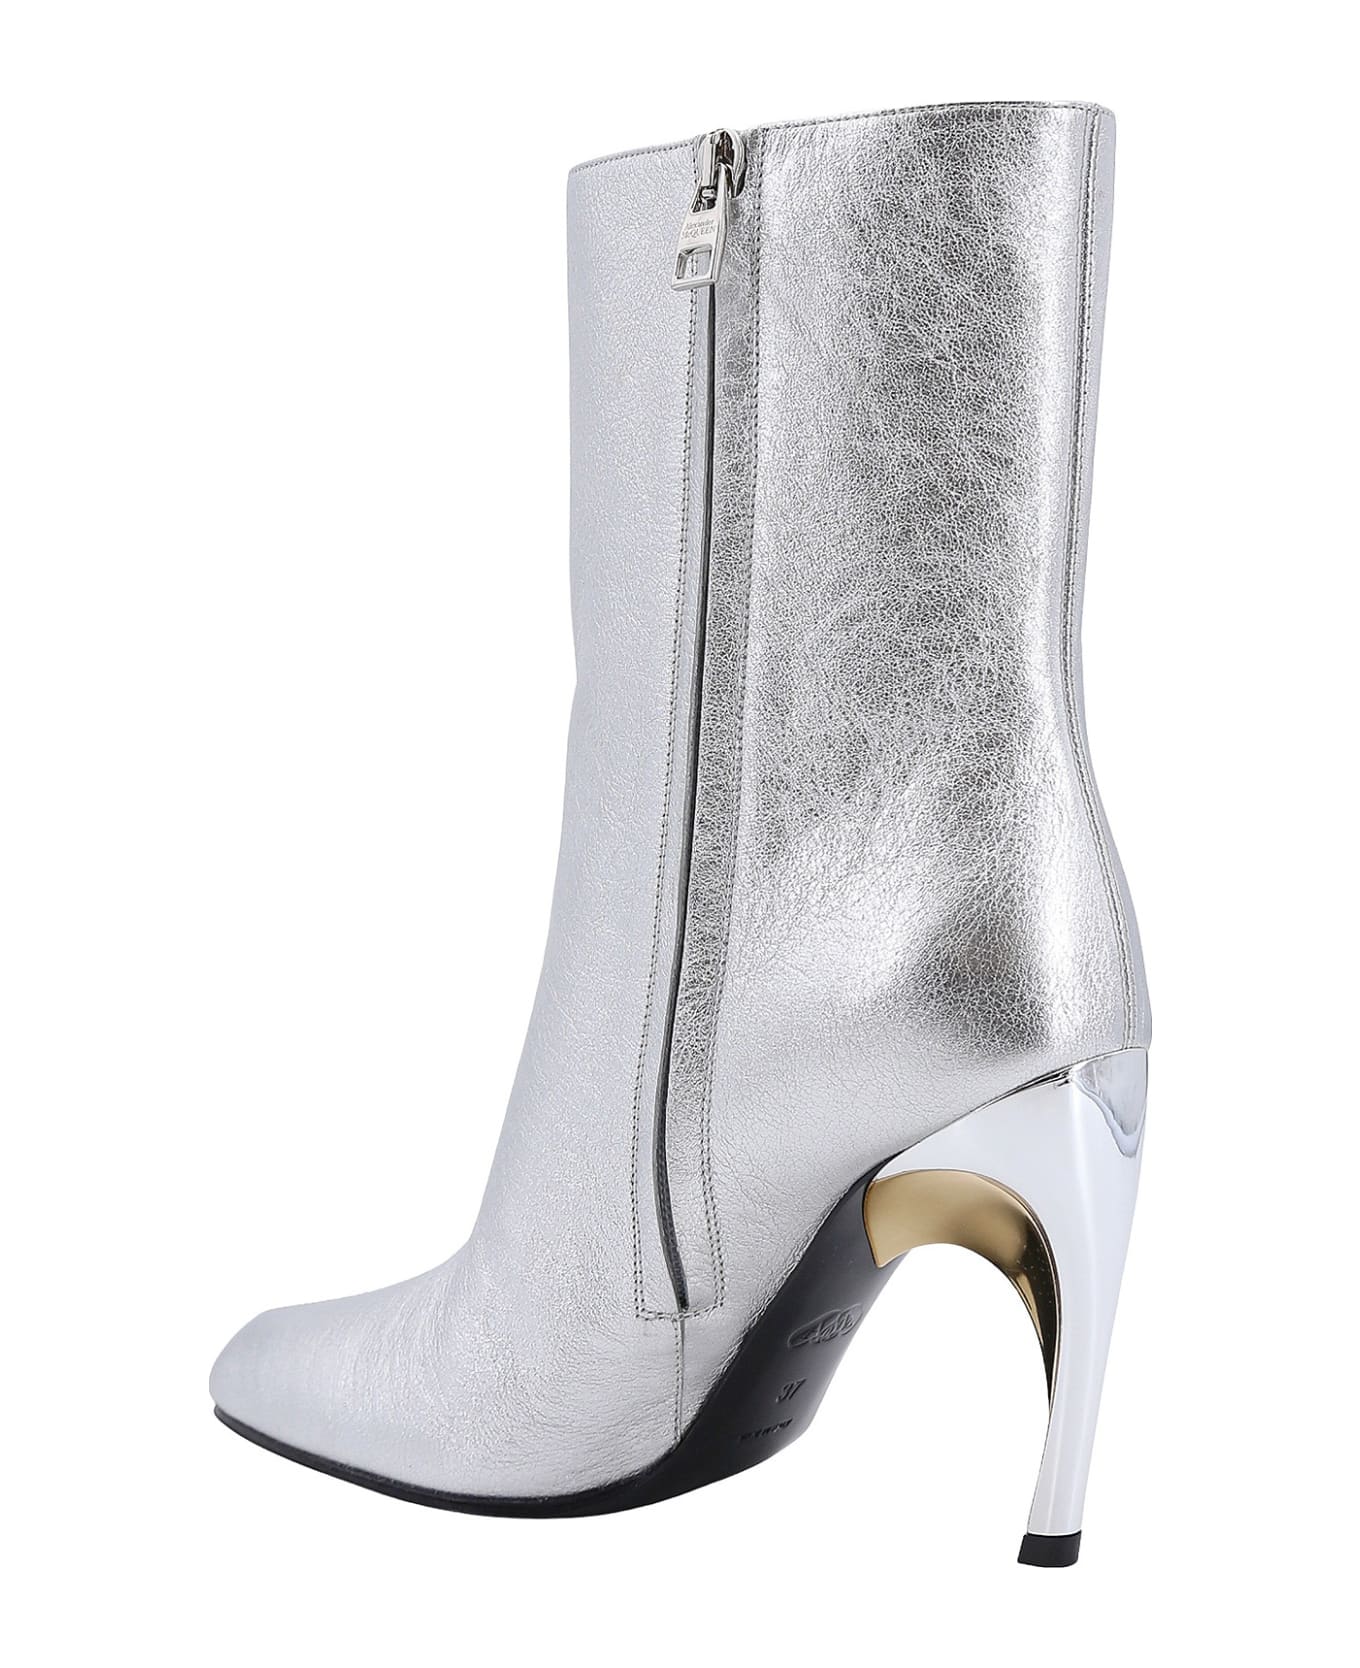 Alexander McQueen Armadillo Ankle Boots - Silver ブーツ